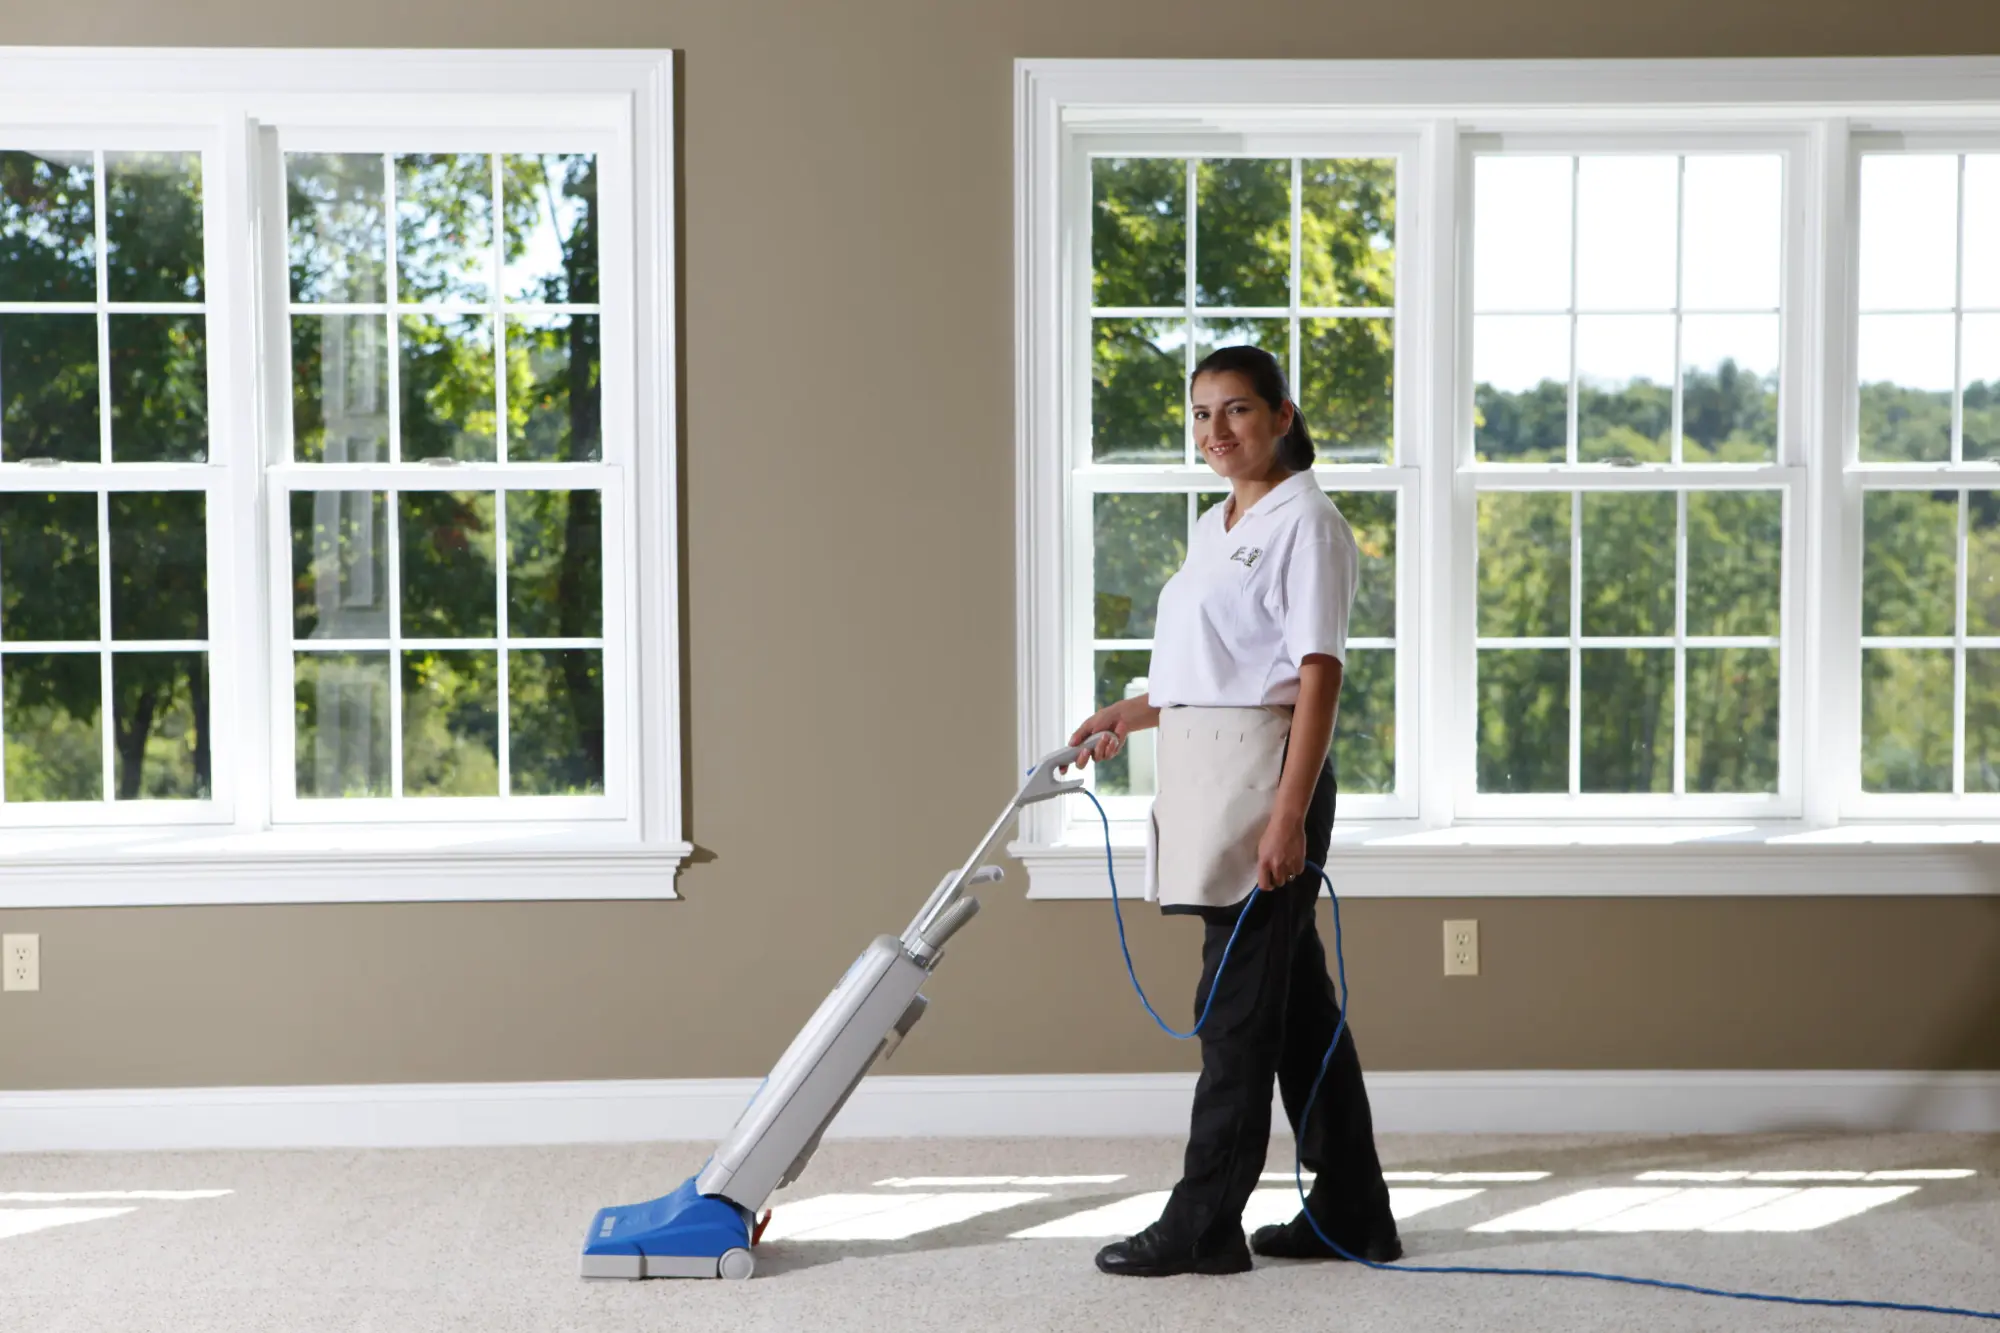 house cleaning services glen mills pa, maid service, excellent job, family business, wonderful job, awesome job, house clean, free estimate, newtown square, own requirements, west chester, lancaster ave, fantastic experience, short notice, work performed, recently moved, background checks, garnet valley, drexel hill, hire, bathrooms, carpets, bathroom, person, hour, specific needs, residential, windows, companies, property